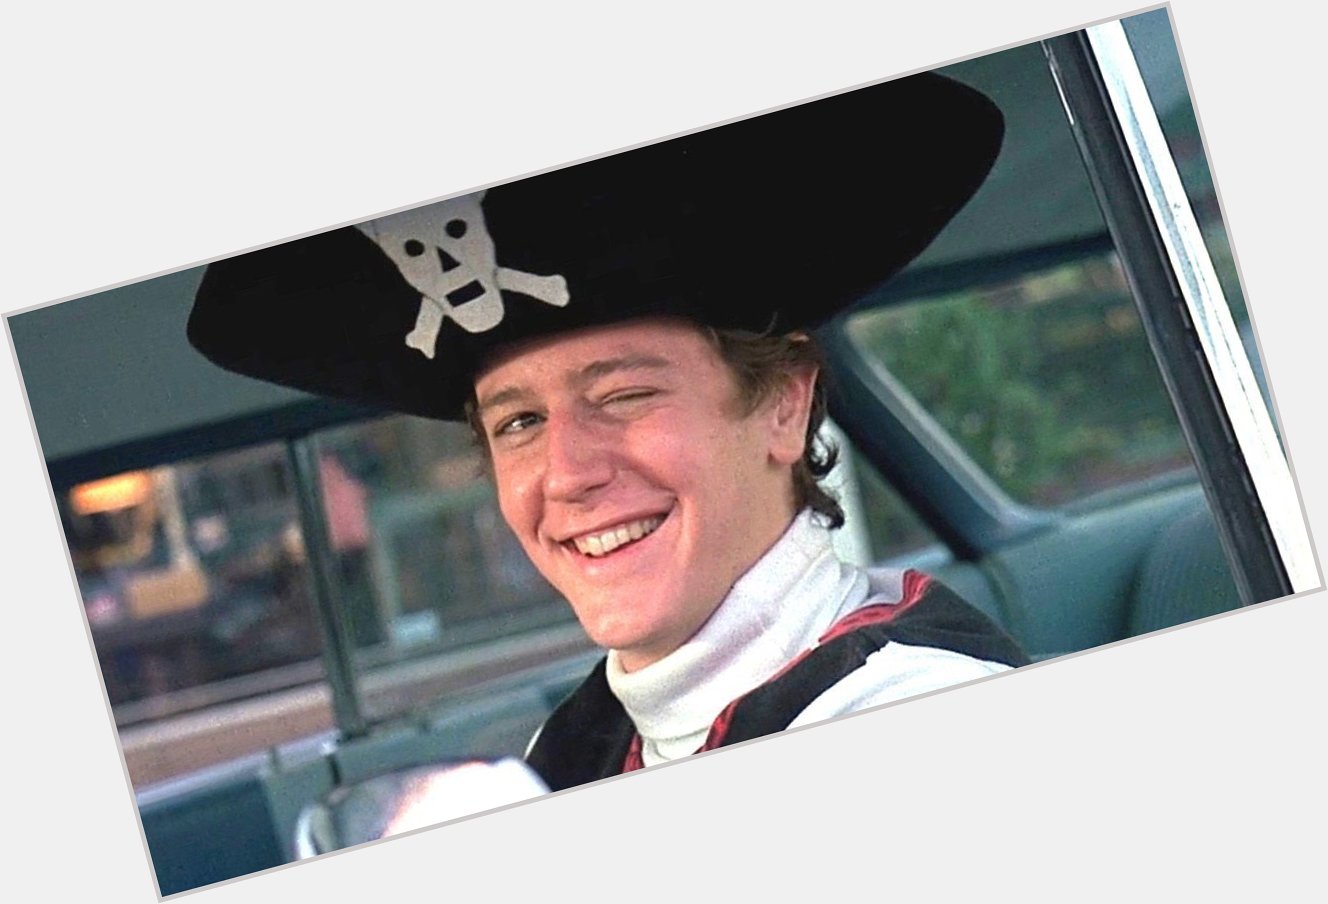 This guy played a big part of my teenage moviegoing years in the 1980s.

Happy birthday Judge Reinhold! 